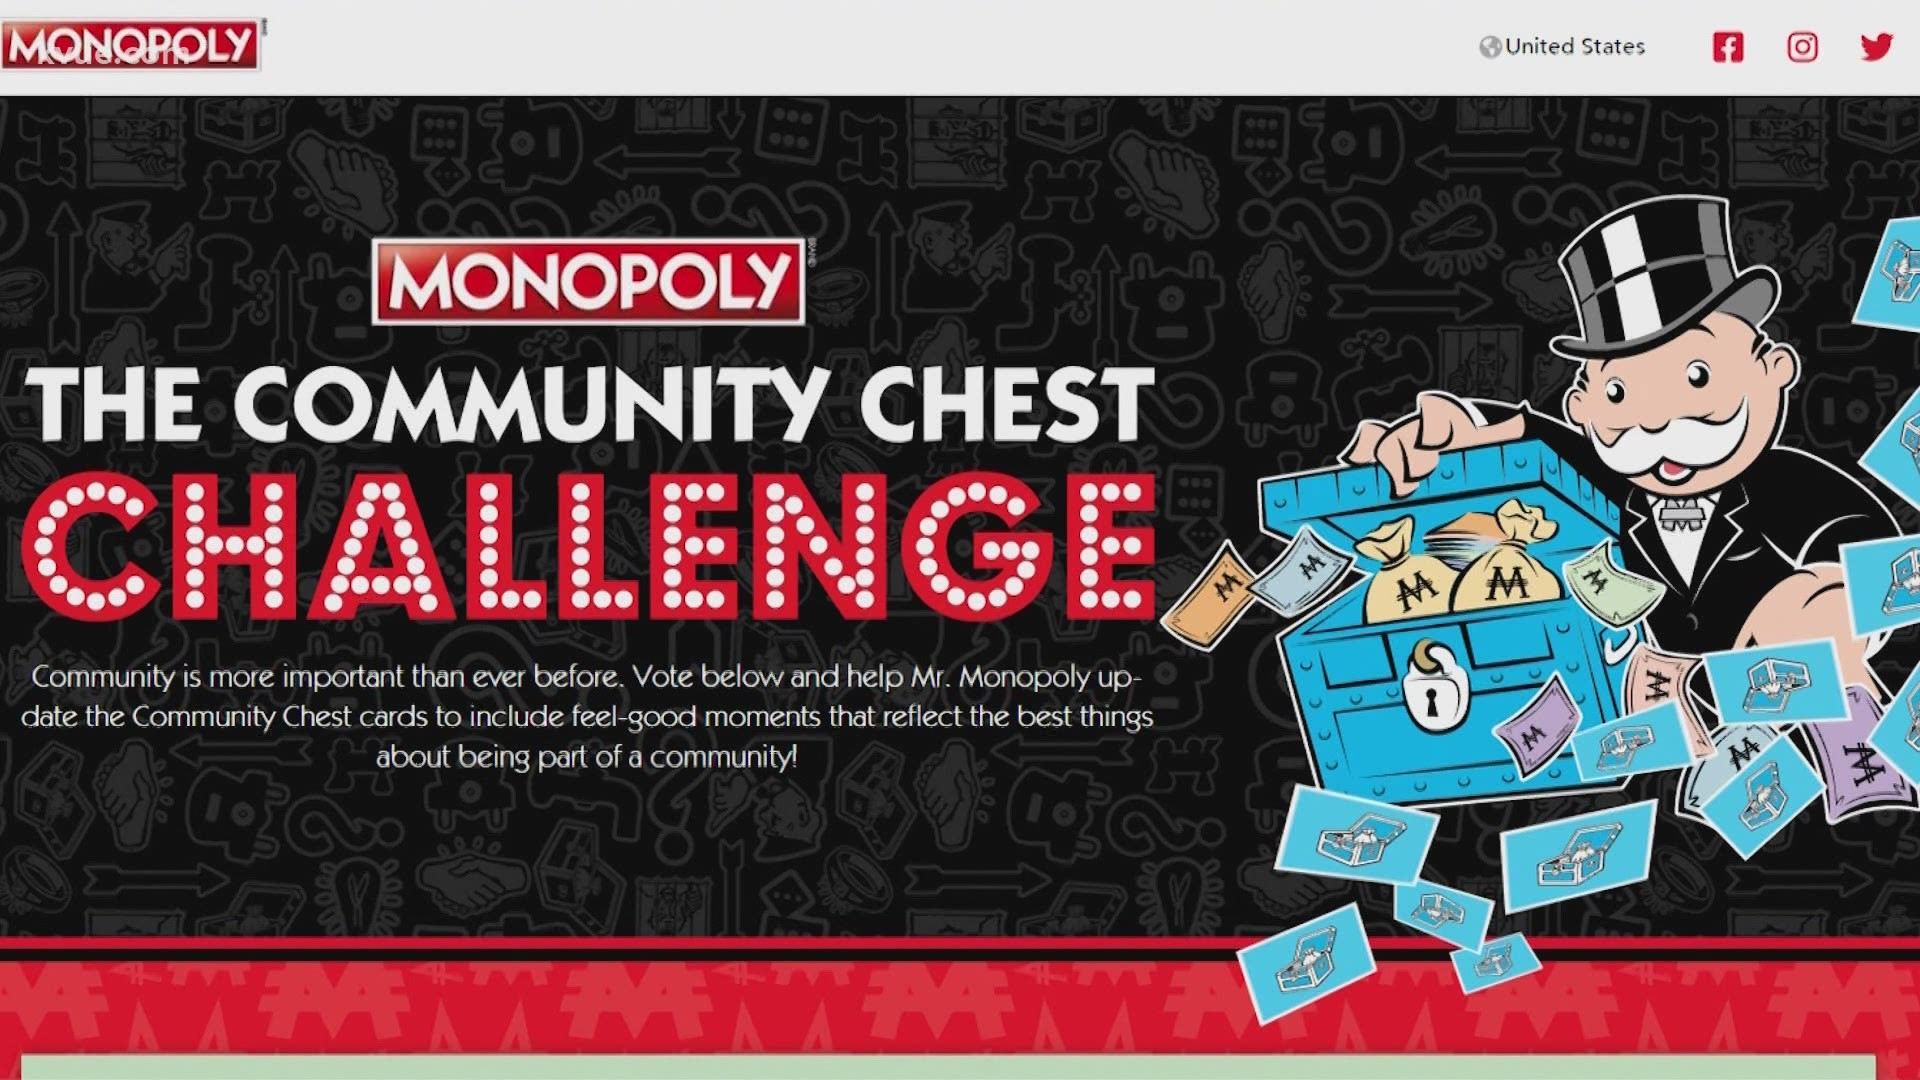 A classic board game is getting an update. For the first time in more than 85 years, Monopoly is changing its community chest cards.